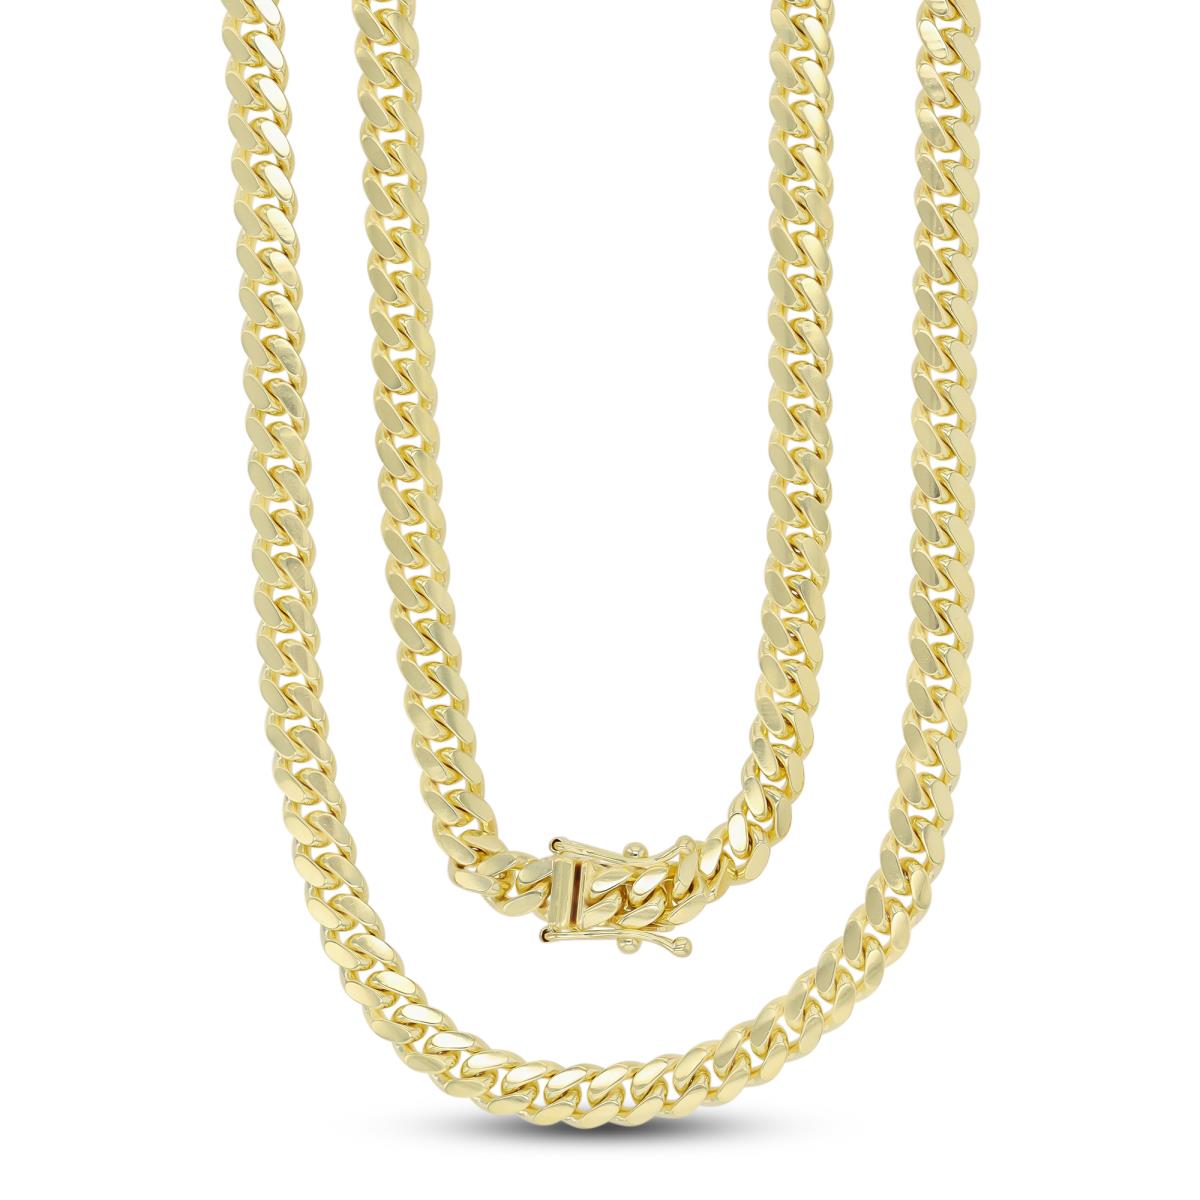 14K Yellow Gold 5mm Solid Miami Cuban 150 26" Chain With Box Lock